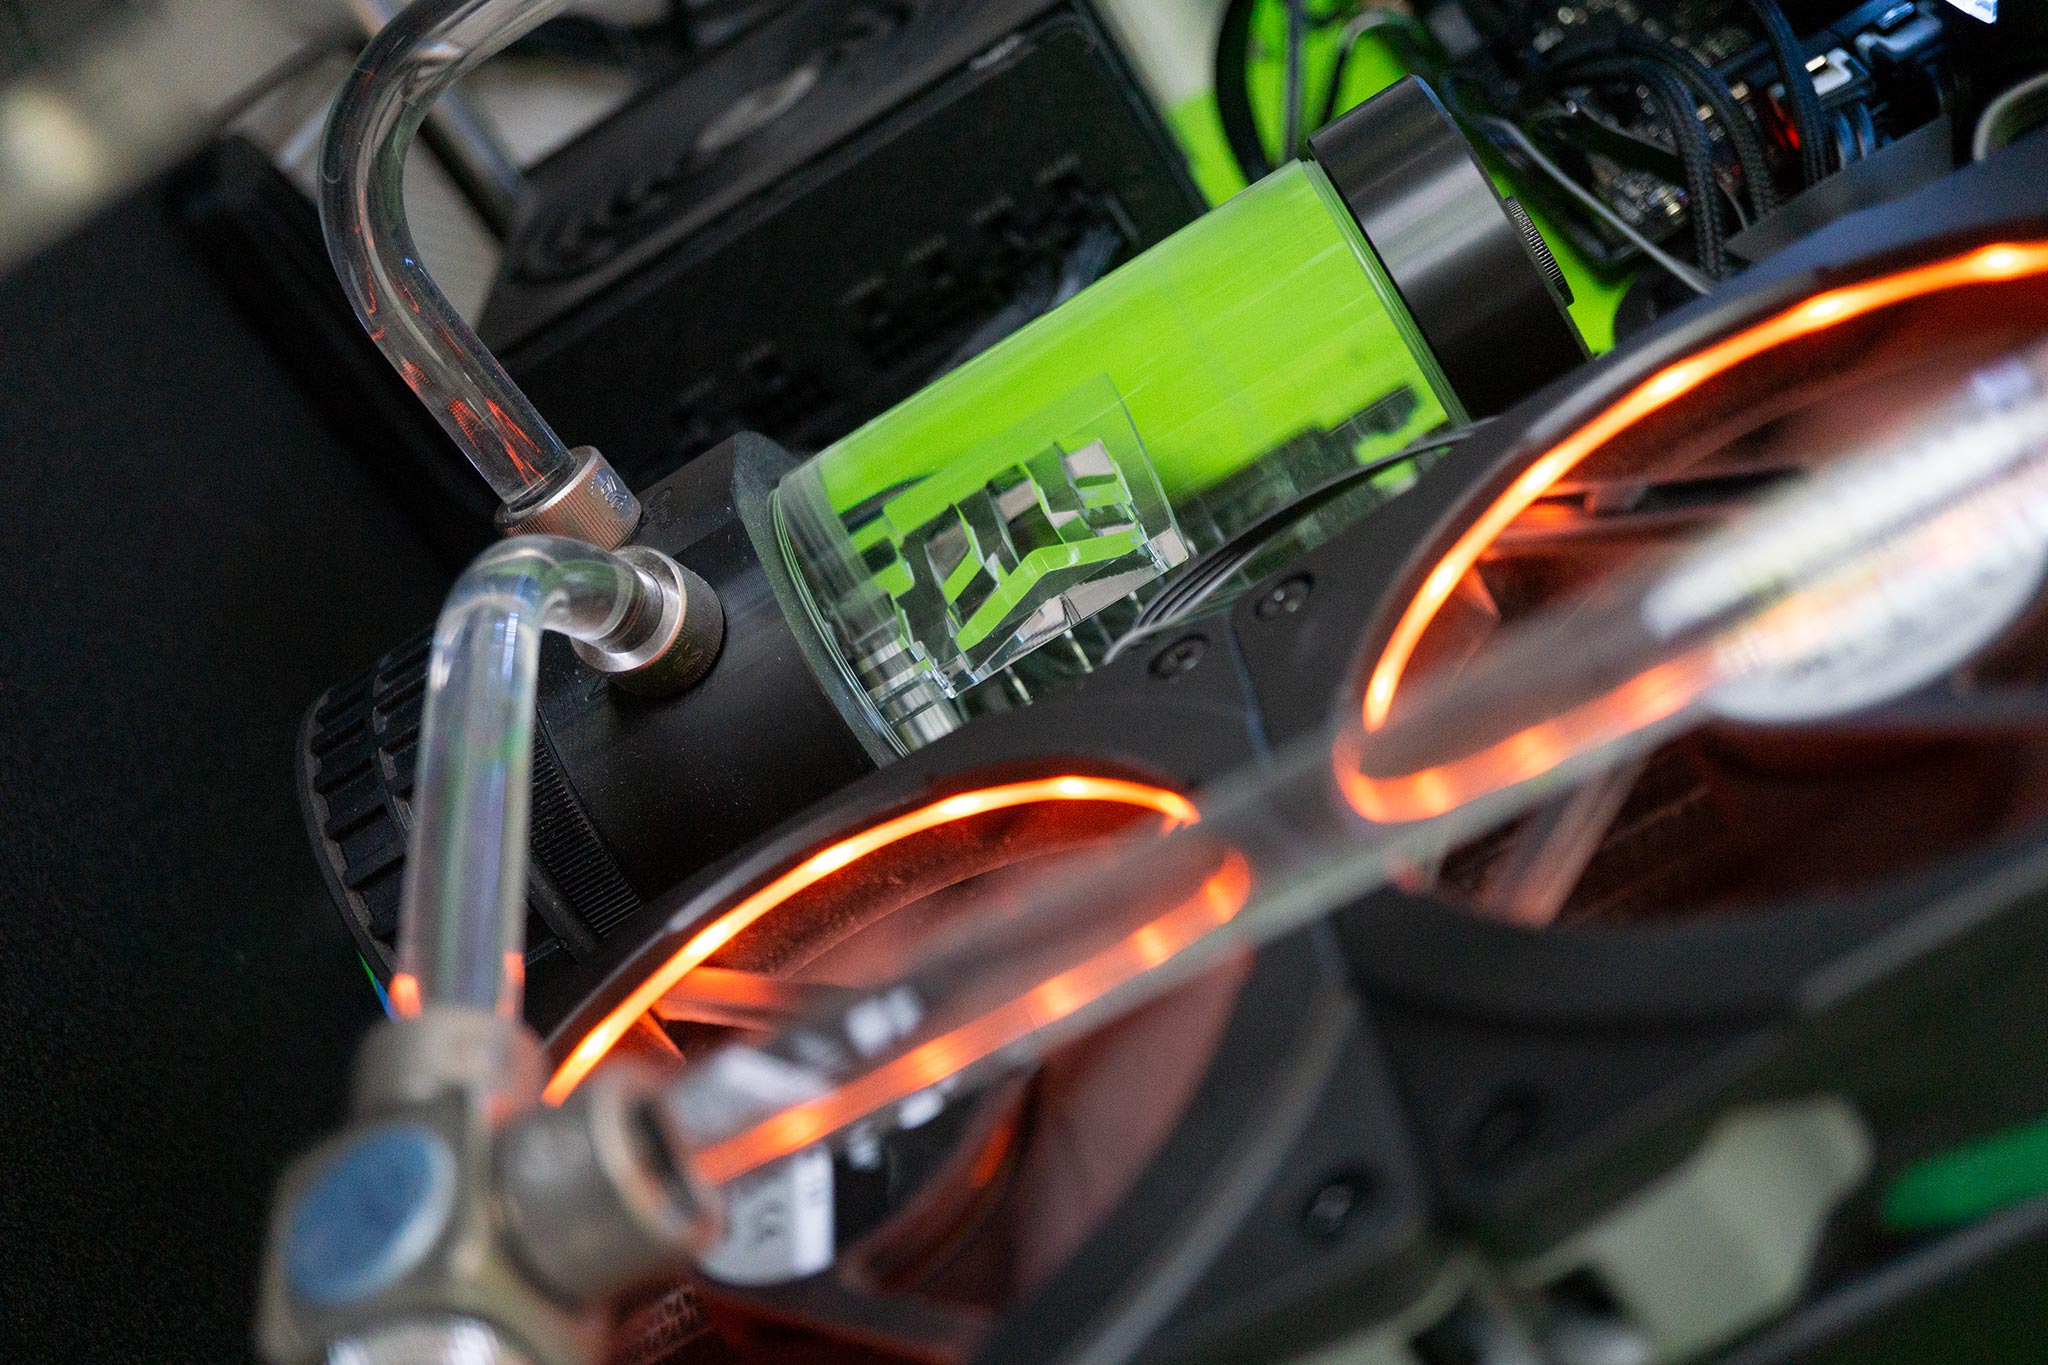 PC water cooling beginner's guide